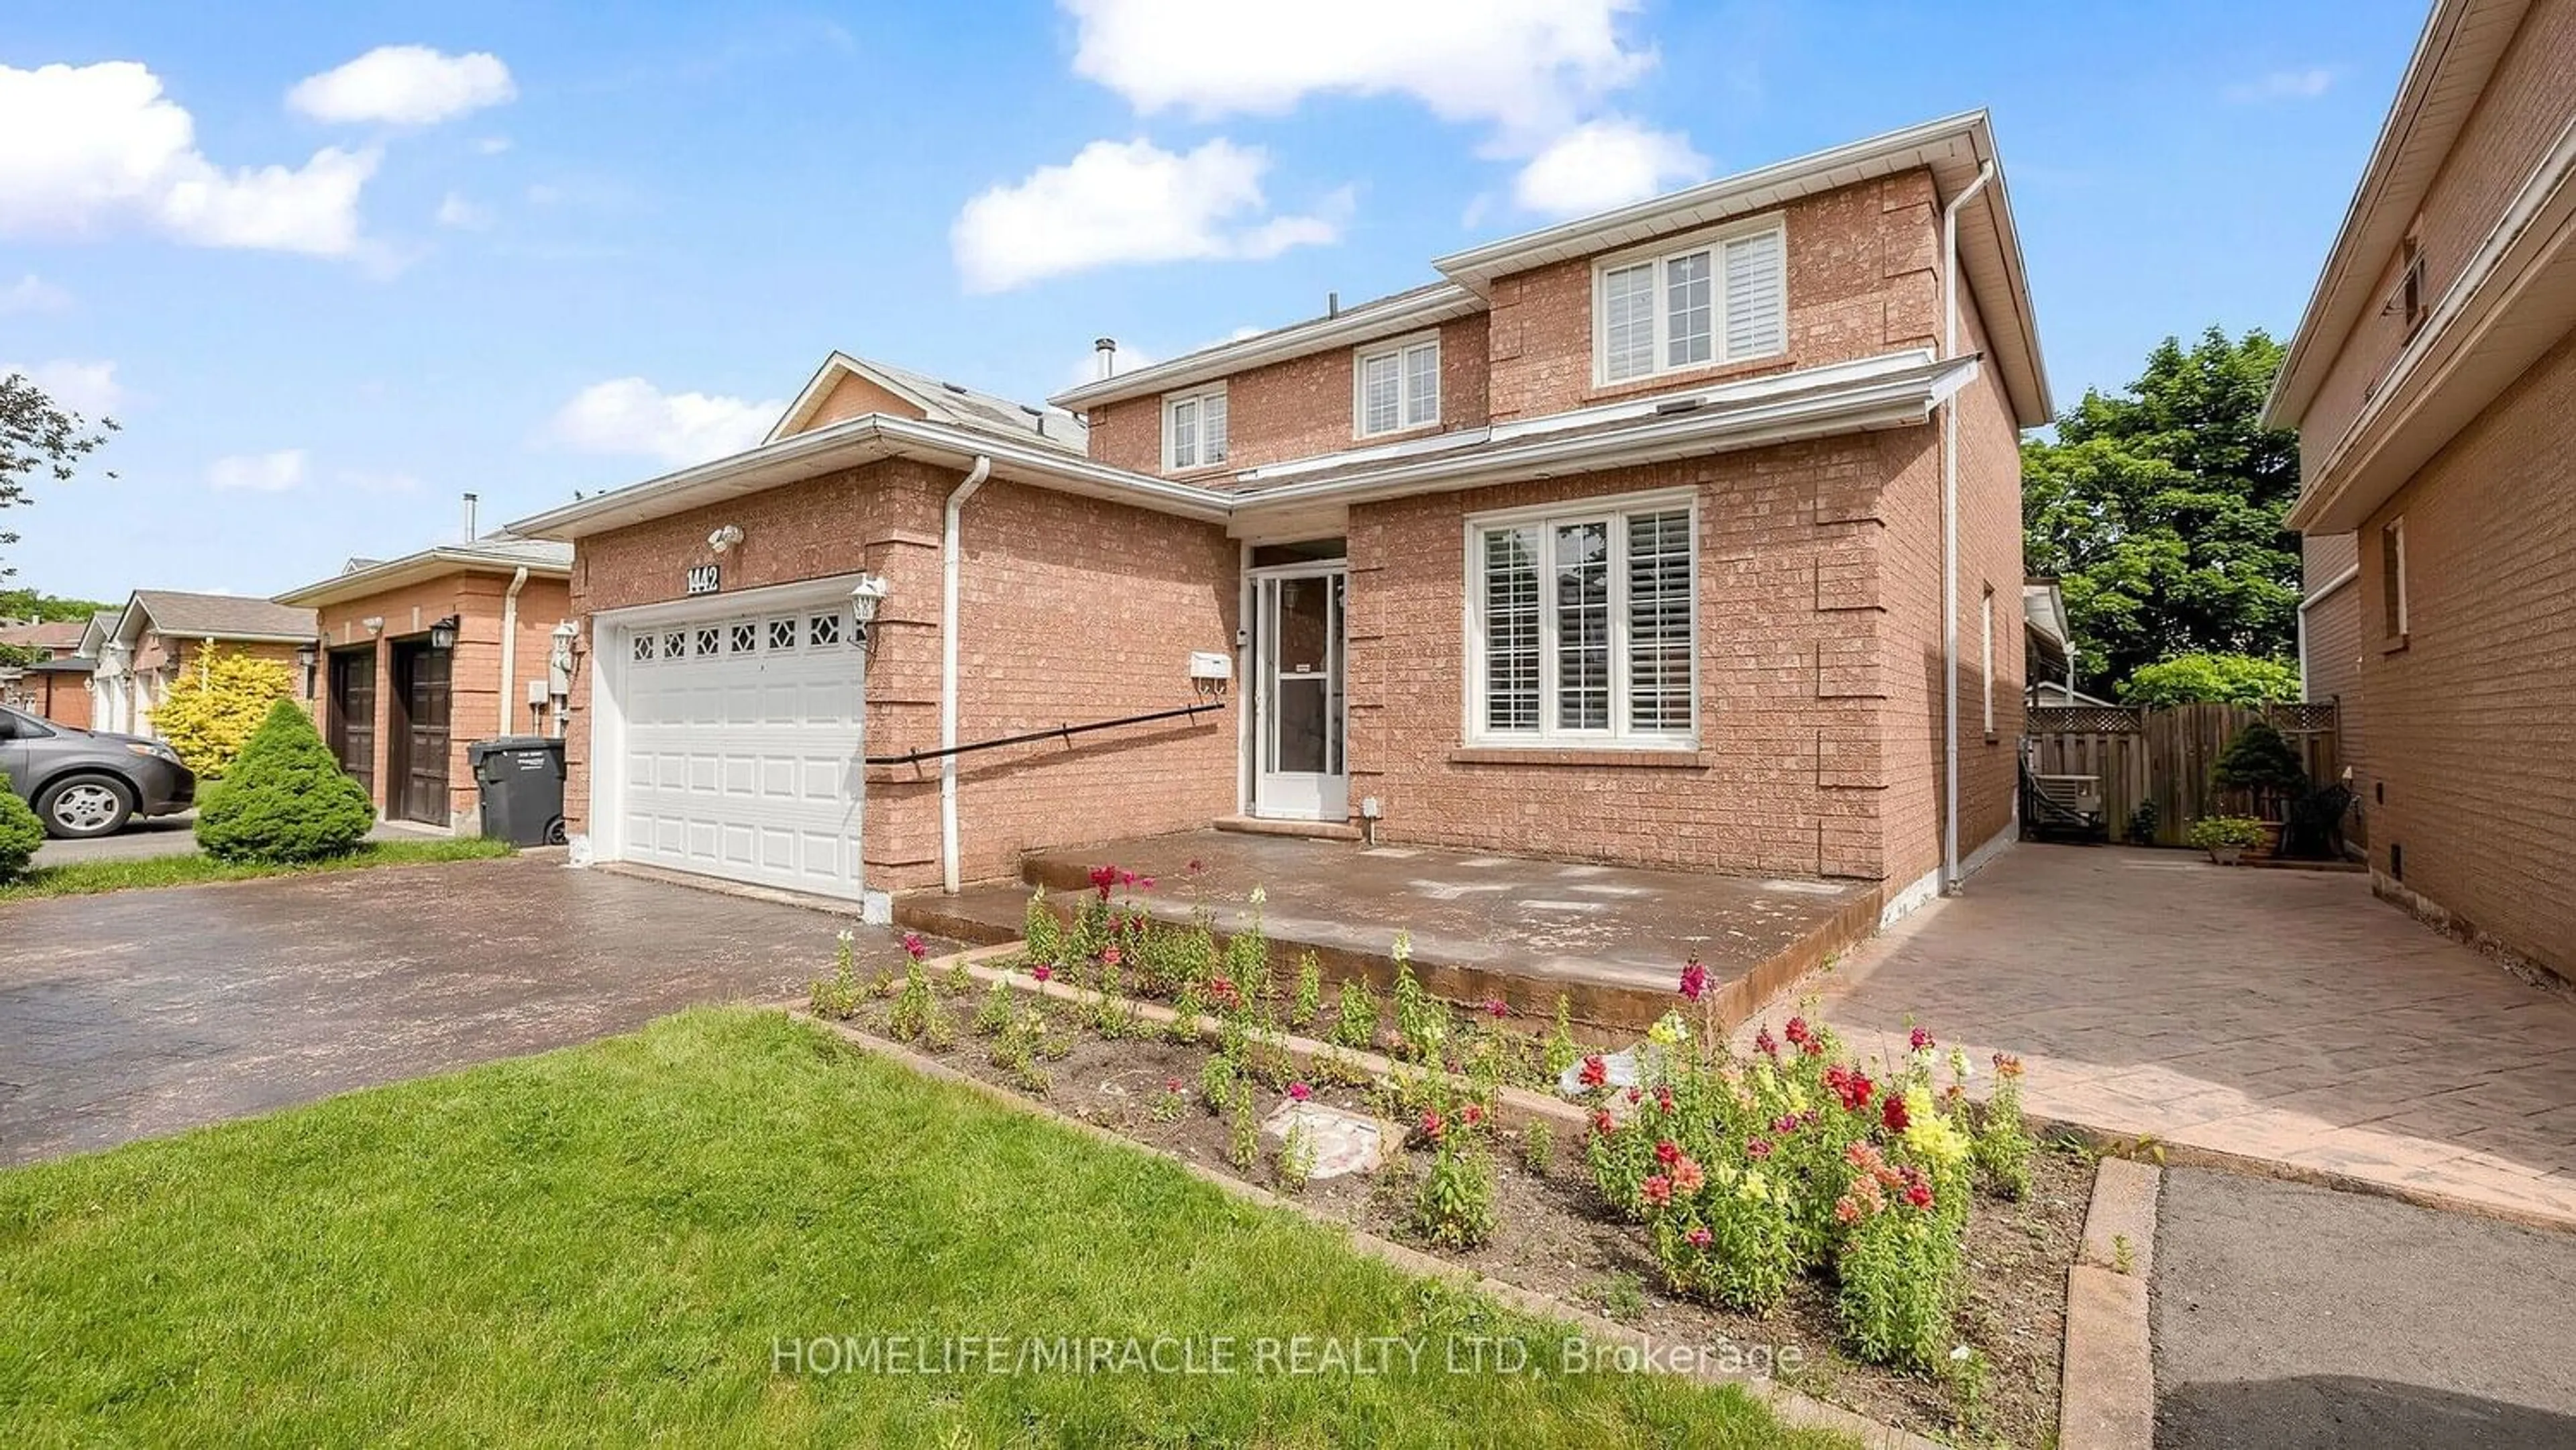 Home with brick exterior material for 1442 Emerson Lane, Mississauga Ontario L5V 1L6